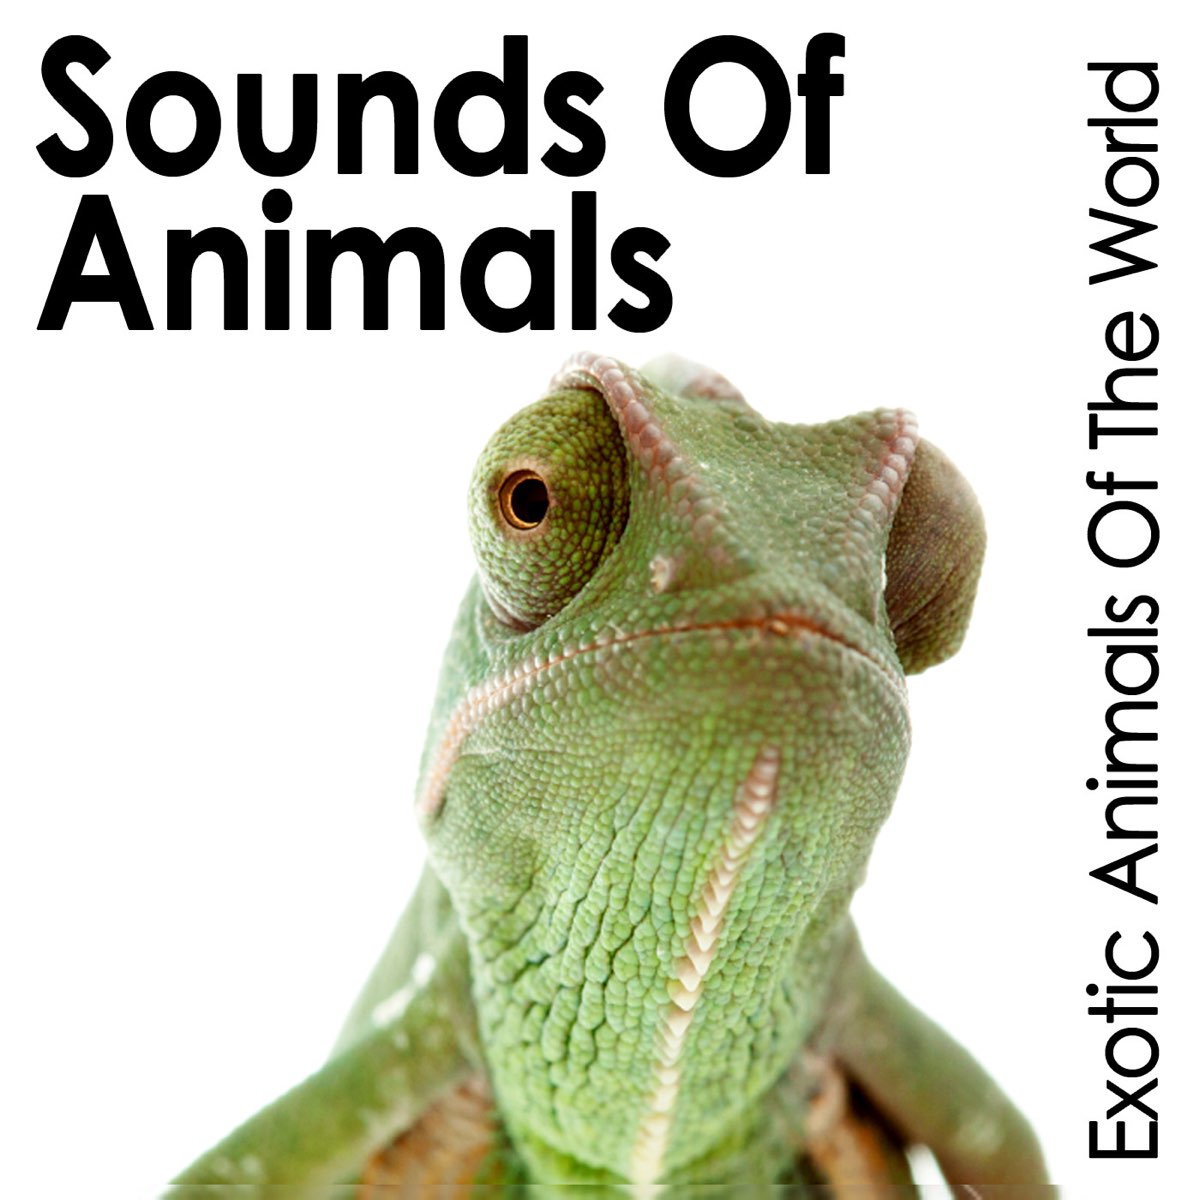 Sounds of Animals: Exotic Animals of the World by Pro Sound Effects Library  on Apple Music